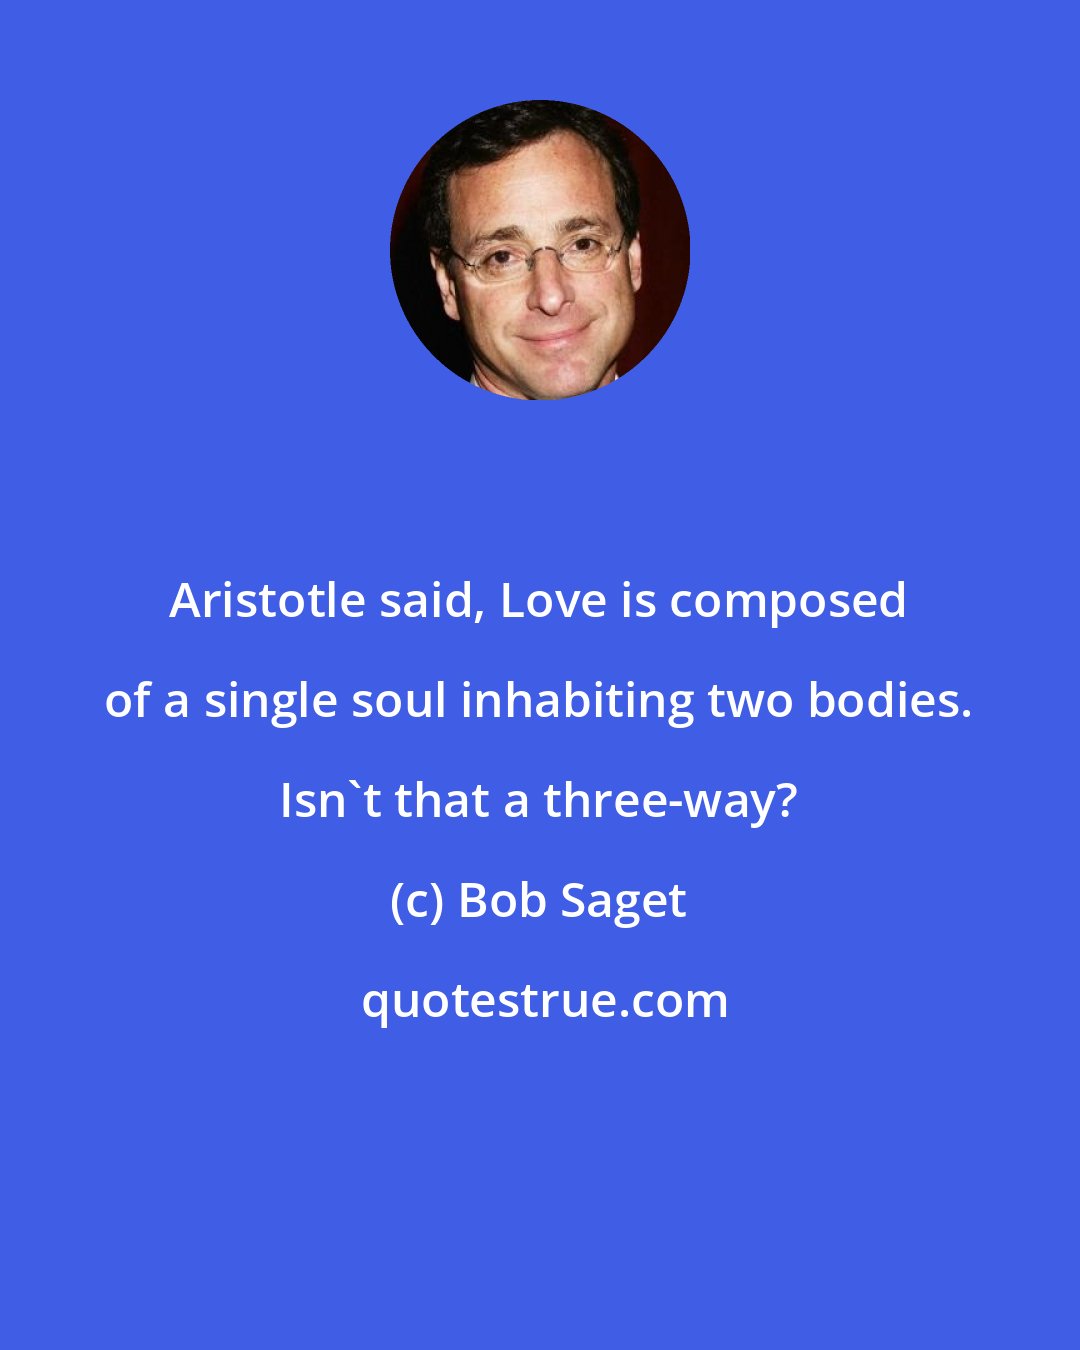 Bob Saget: Aristotle said, Love is composed of a single soul inhabiting two bodies. Isn't that a three-way?